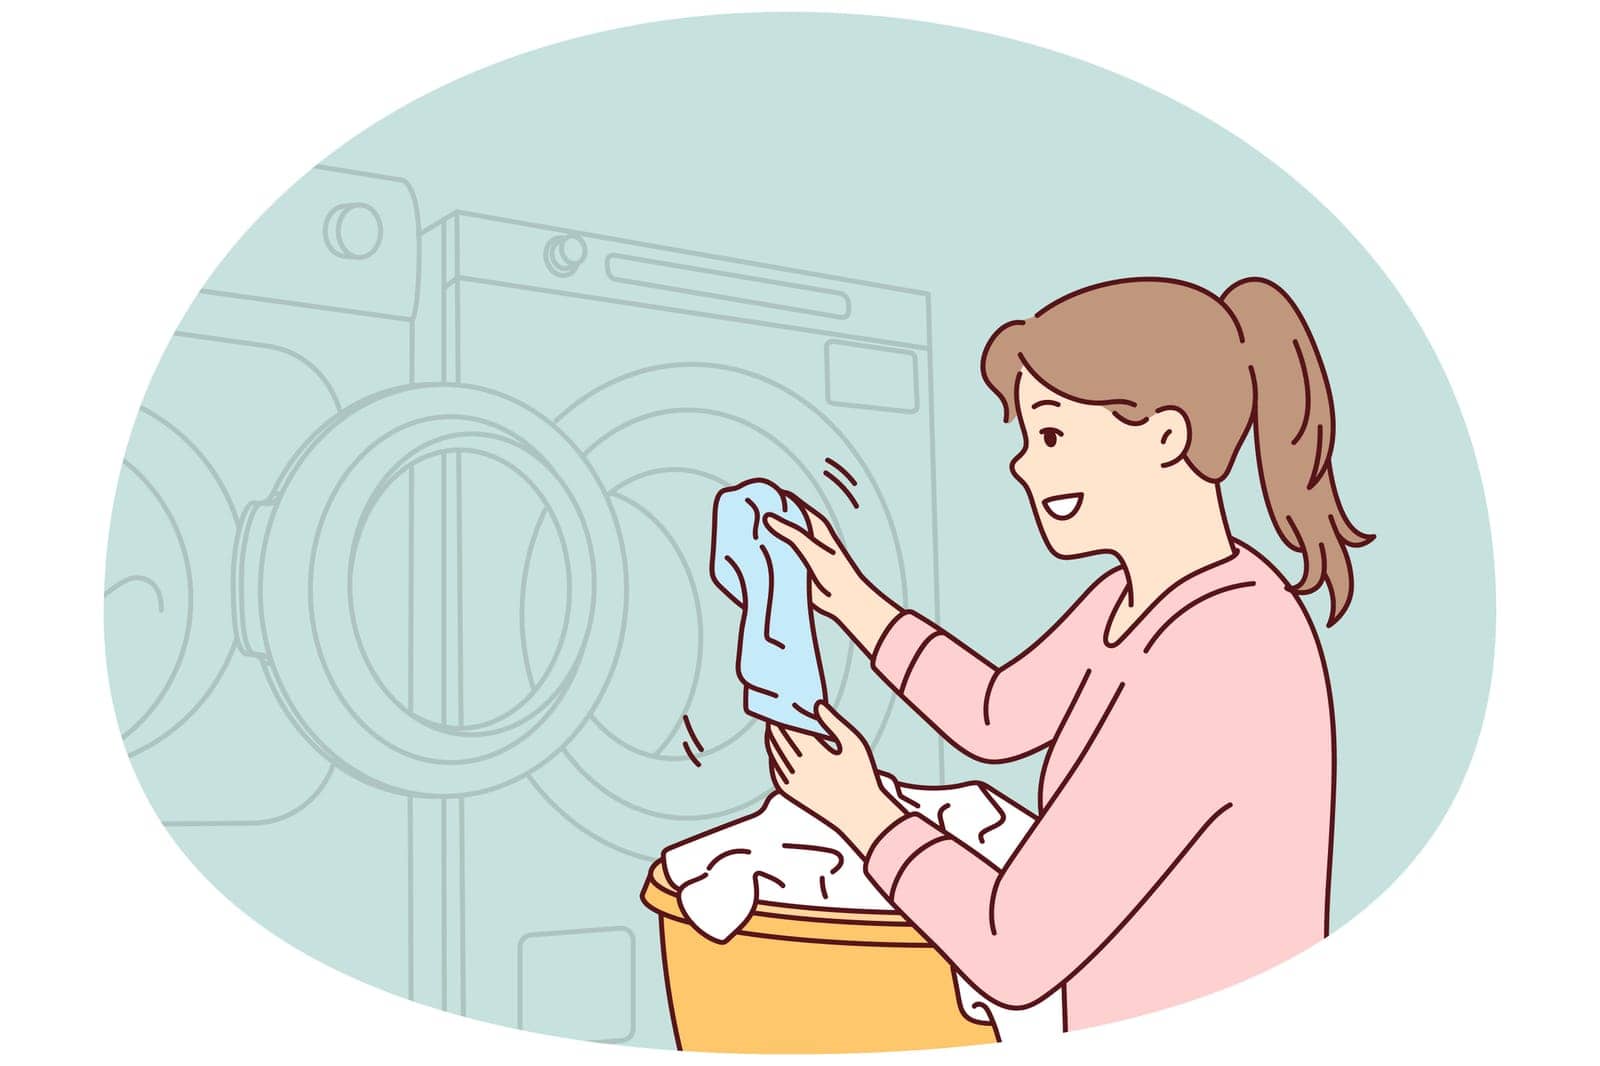 Woman throws dirty laundry into washing machine to make laundry fresh and smell good. Girl using laundromat stands with basket filled with soiled everyday things. Flat vector image